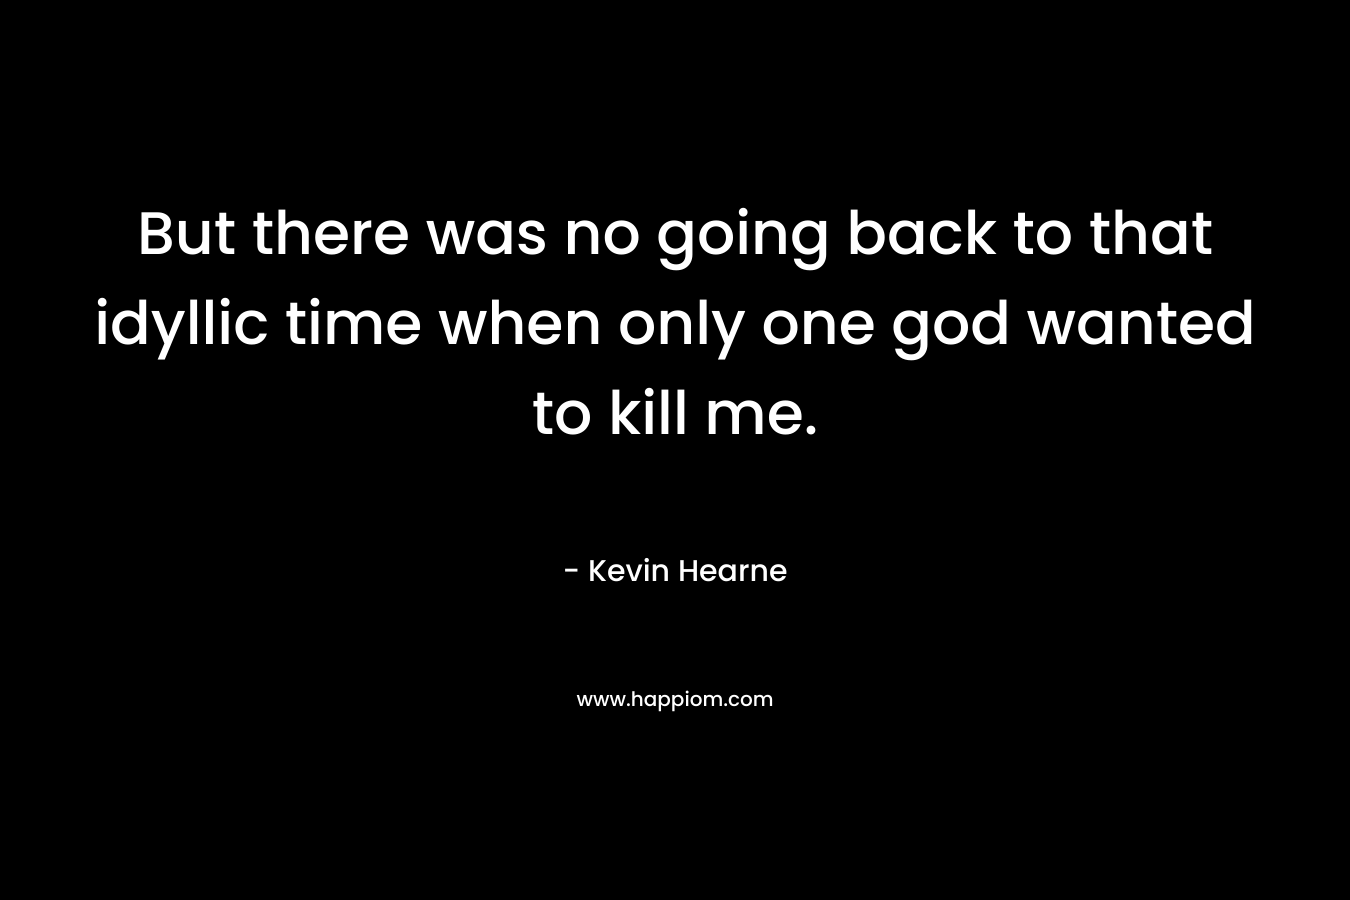 But there was no going back to that idyllic time when only one god wanted to kill me. – Kevin Hearne